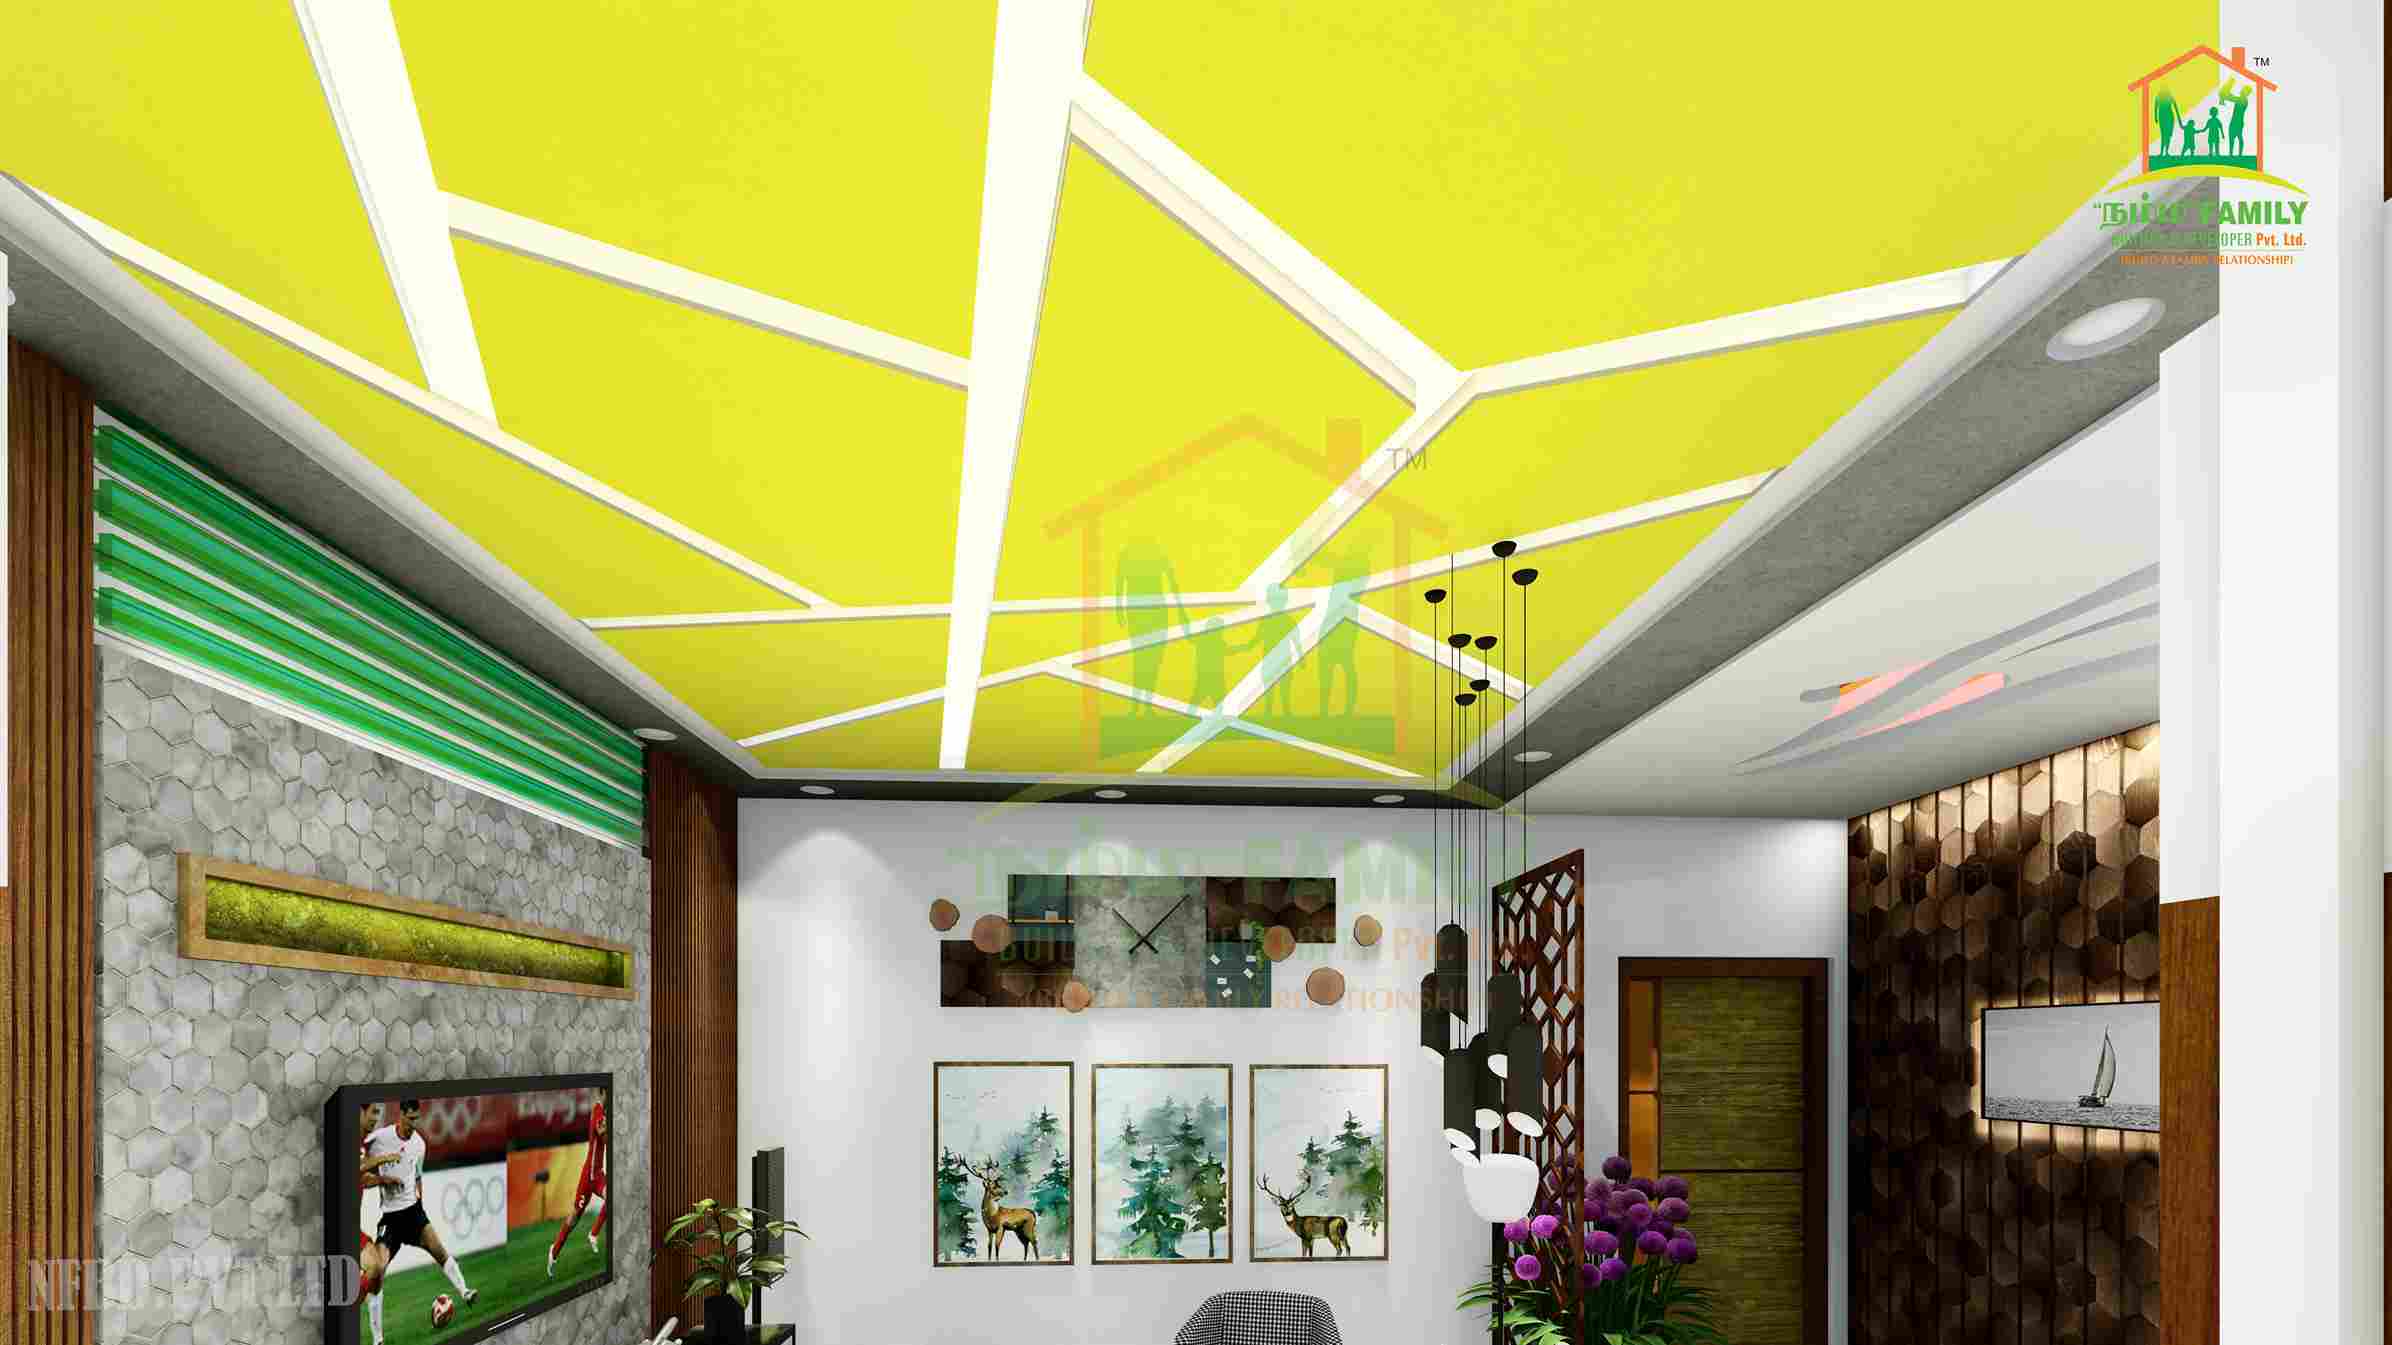 Match with flooring Bedroom Ceiling Design